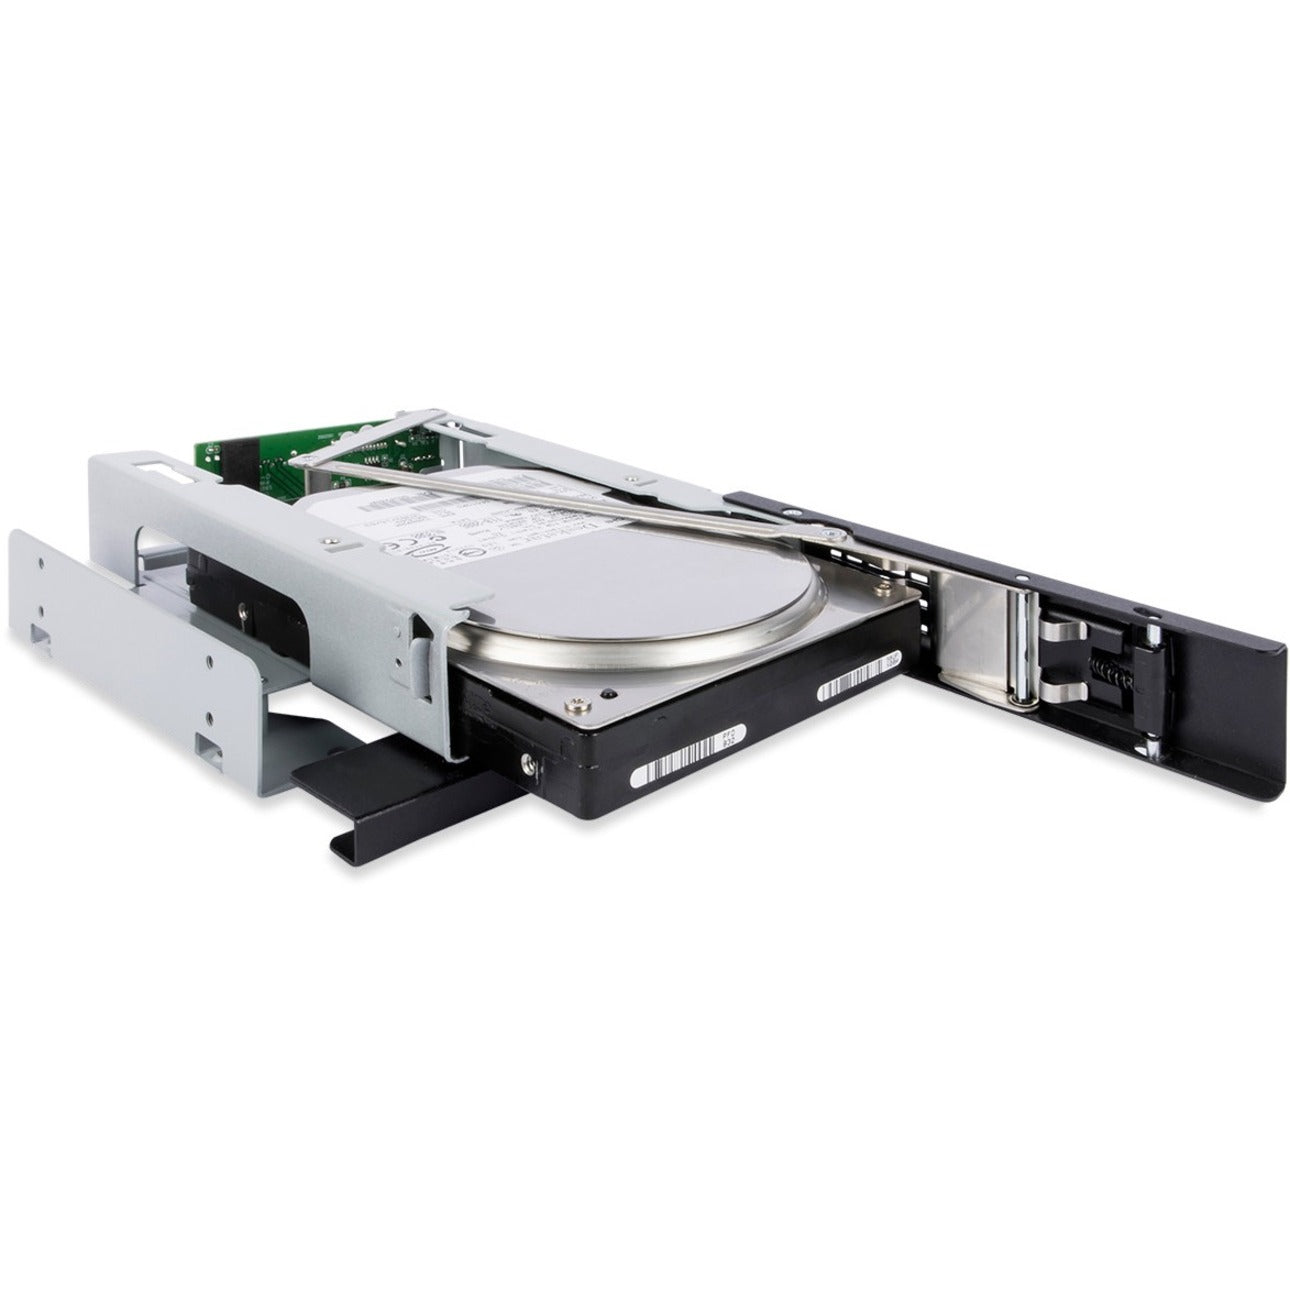 Icy Dock MB171SP-1B TurboSwap Tray-less 3.5" SAS/SATA HDD Mobile Rack Enclosure for 5.25" Bay, Hot Swappable, Black